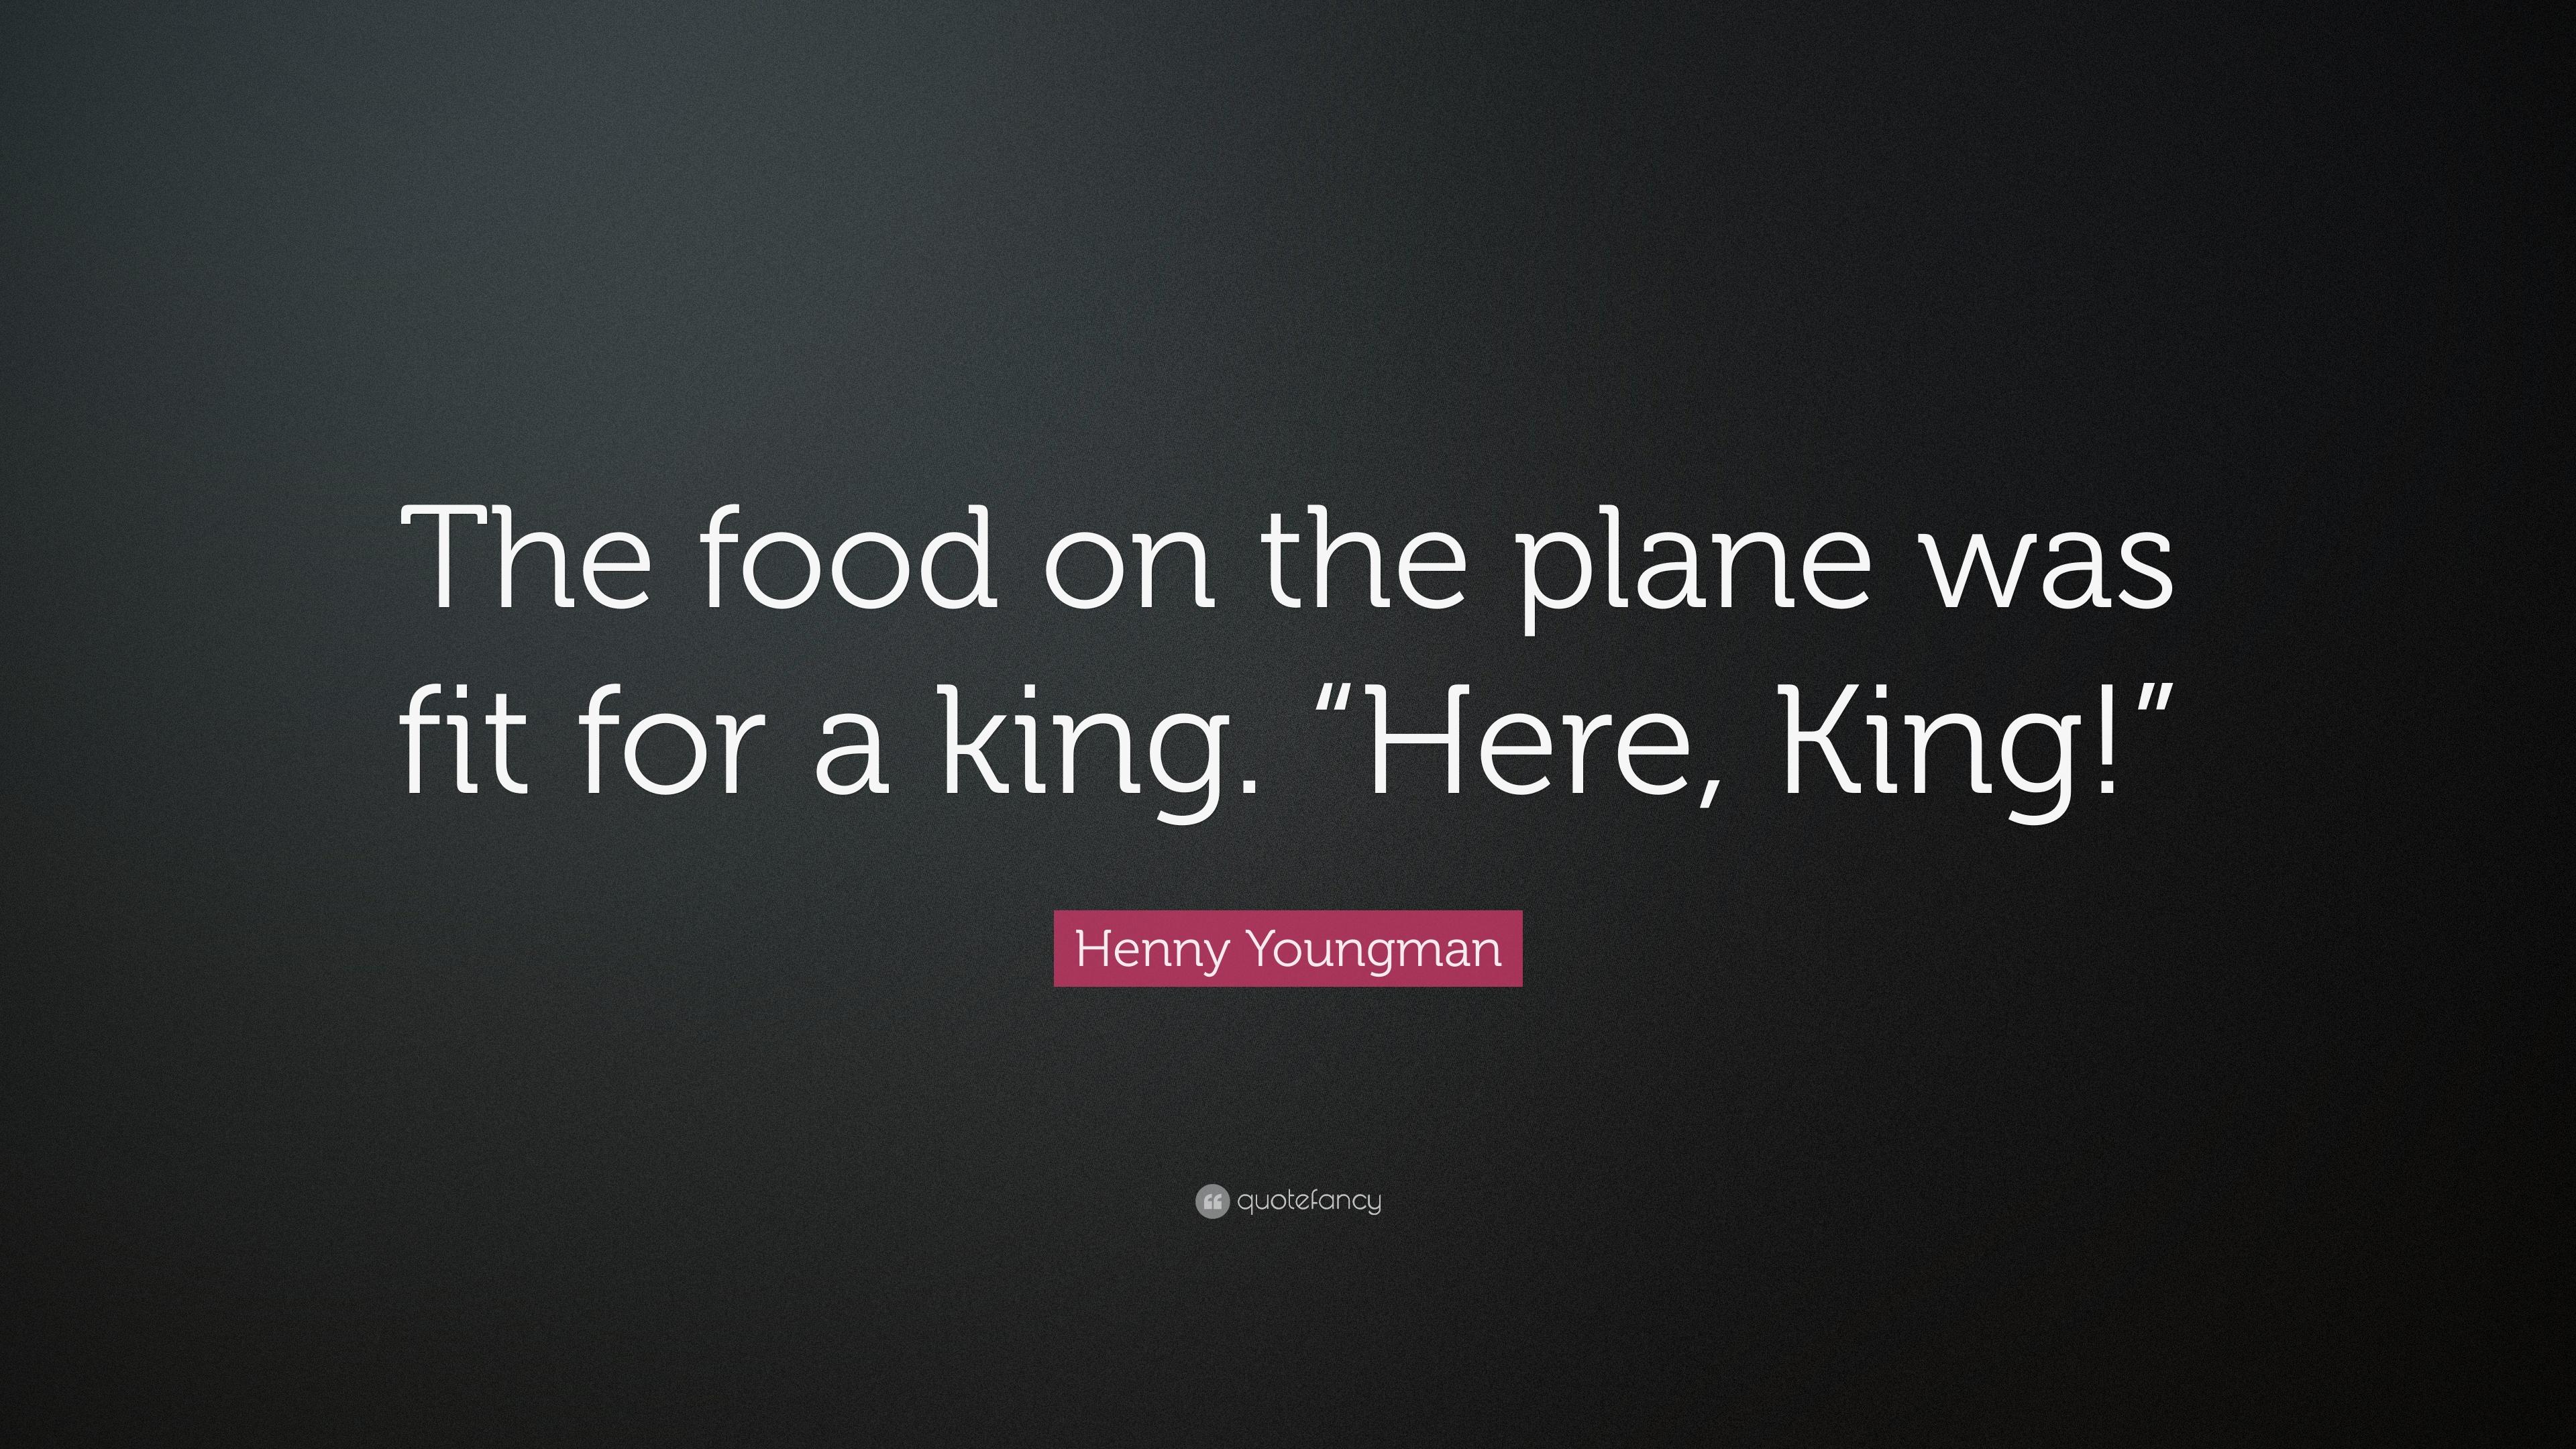 Henny Youngman Quote: “The food on the plane was fit for a